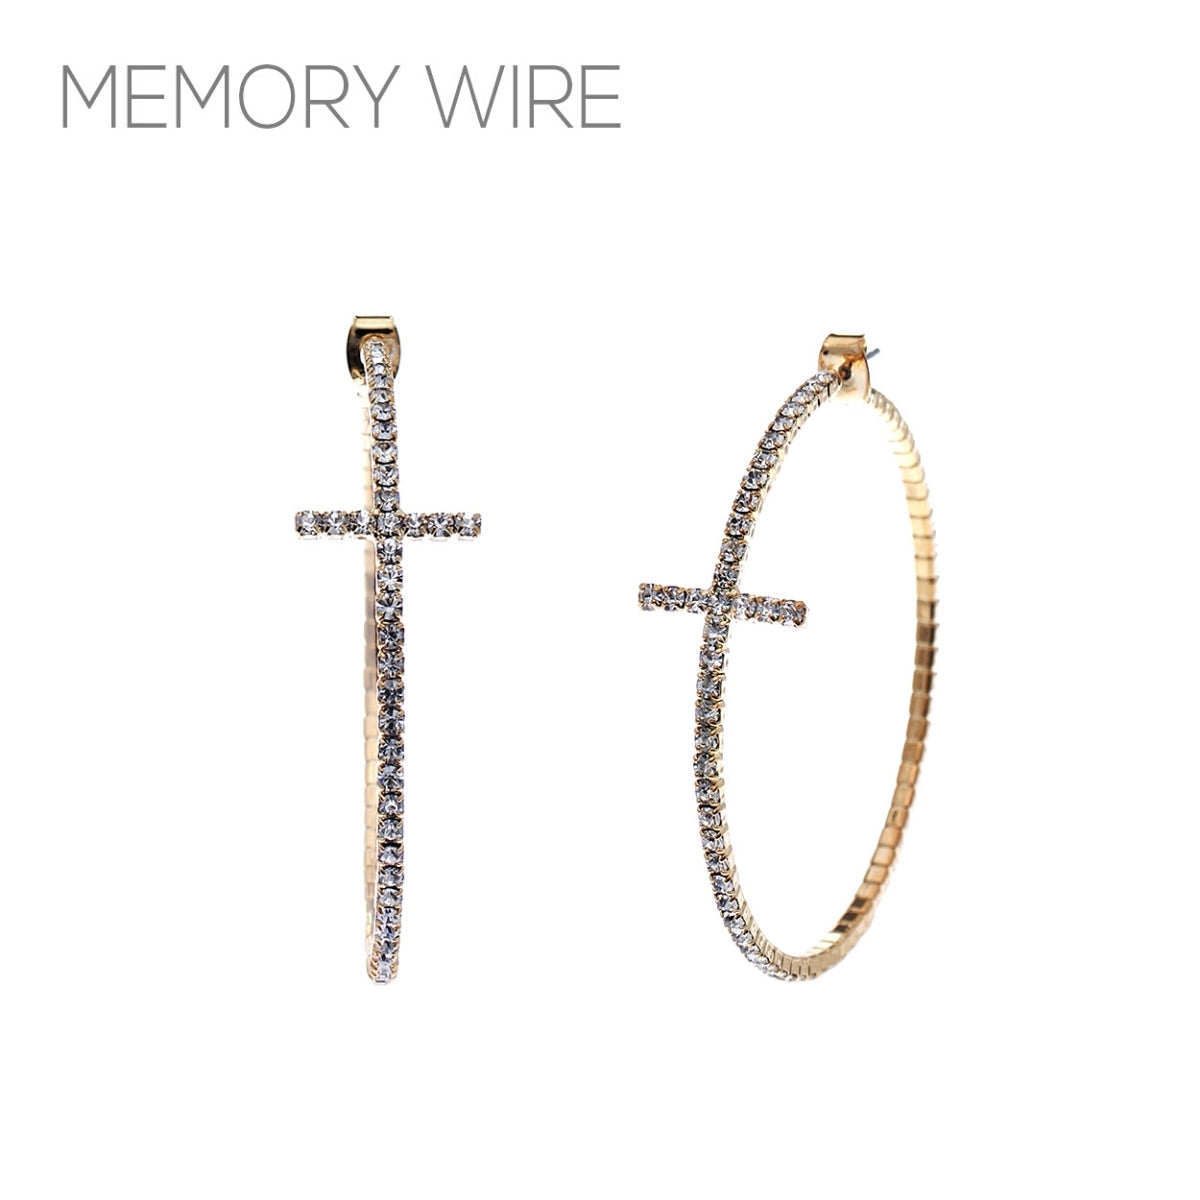 Gold Stone Memory Wire Cross Hoops